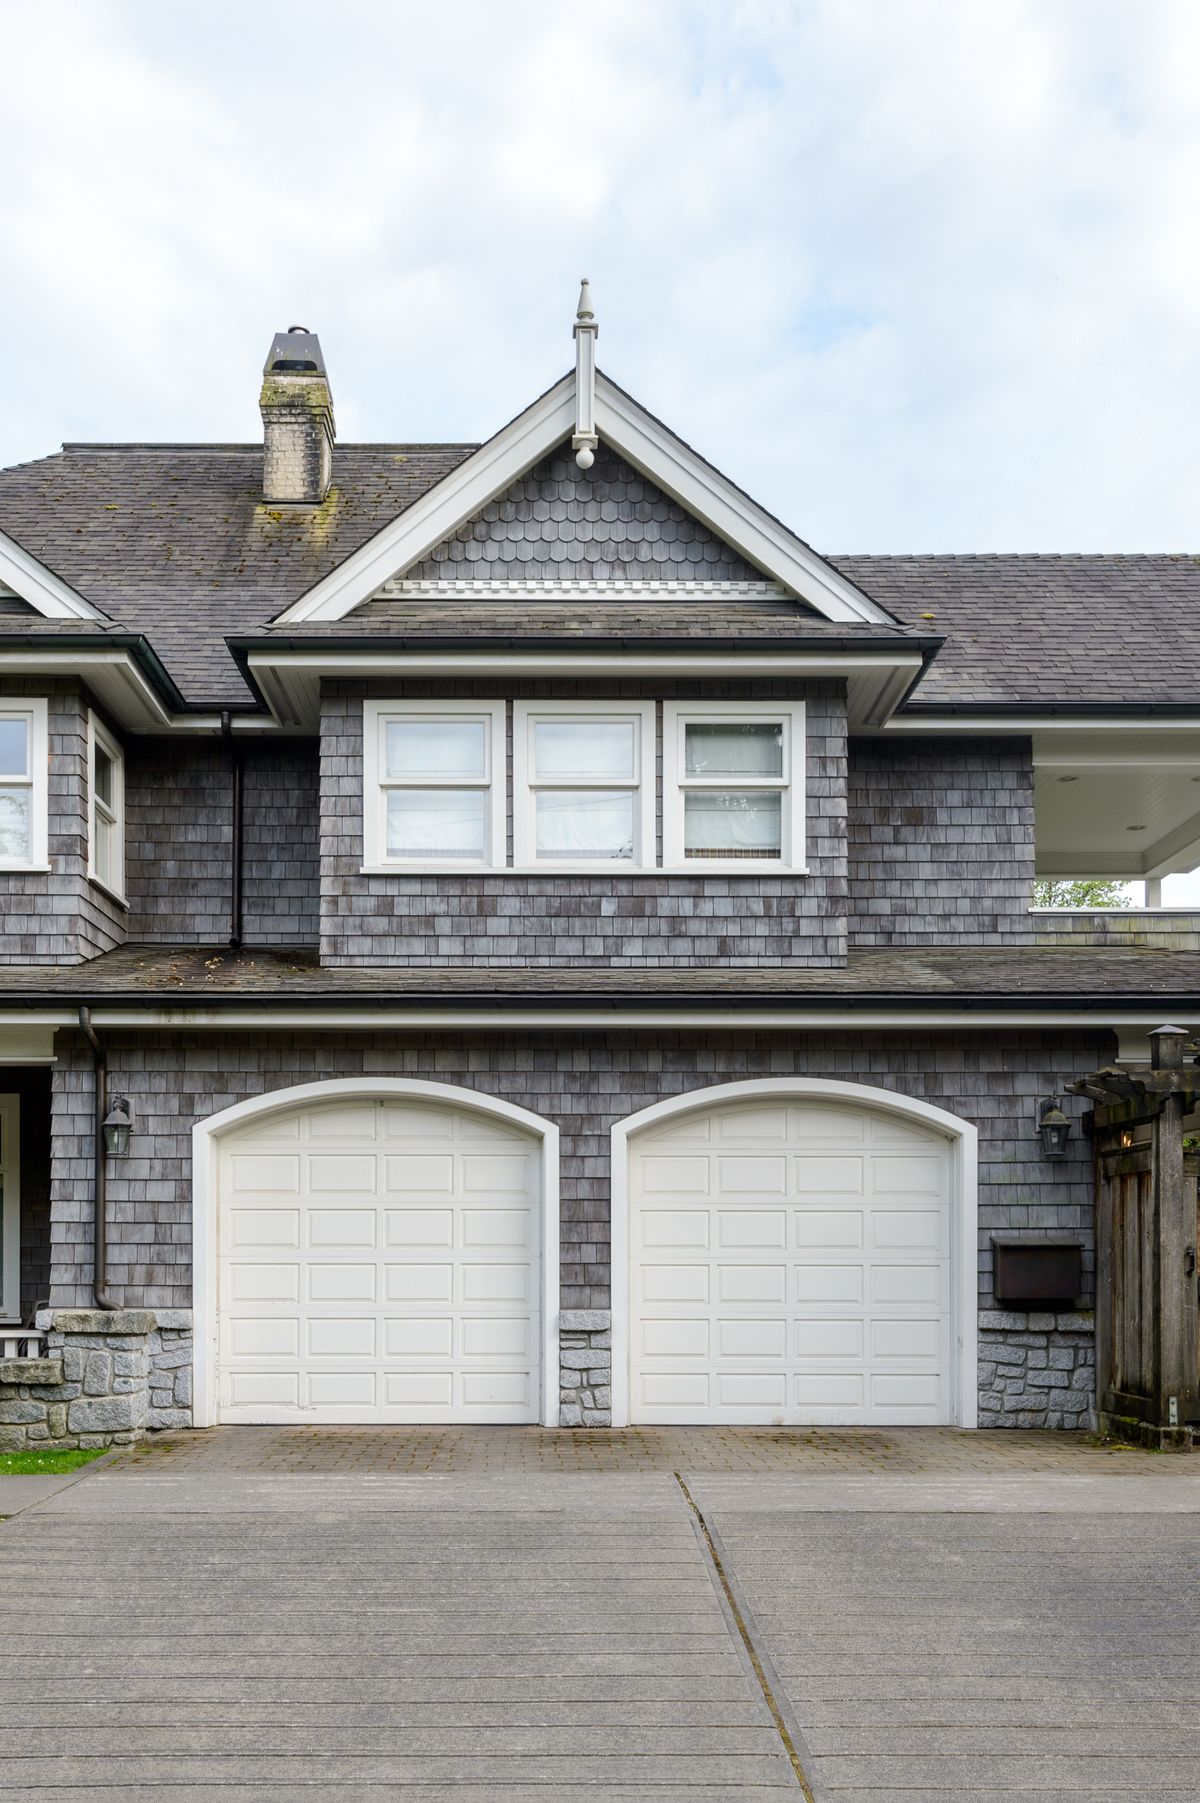 10 Garage Door Color Ideas That go with Gray House